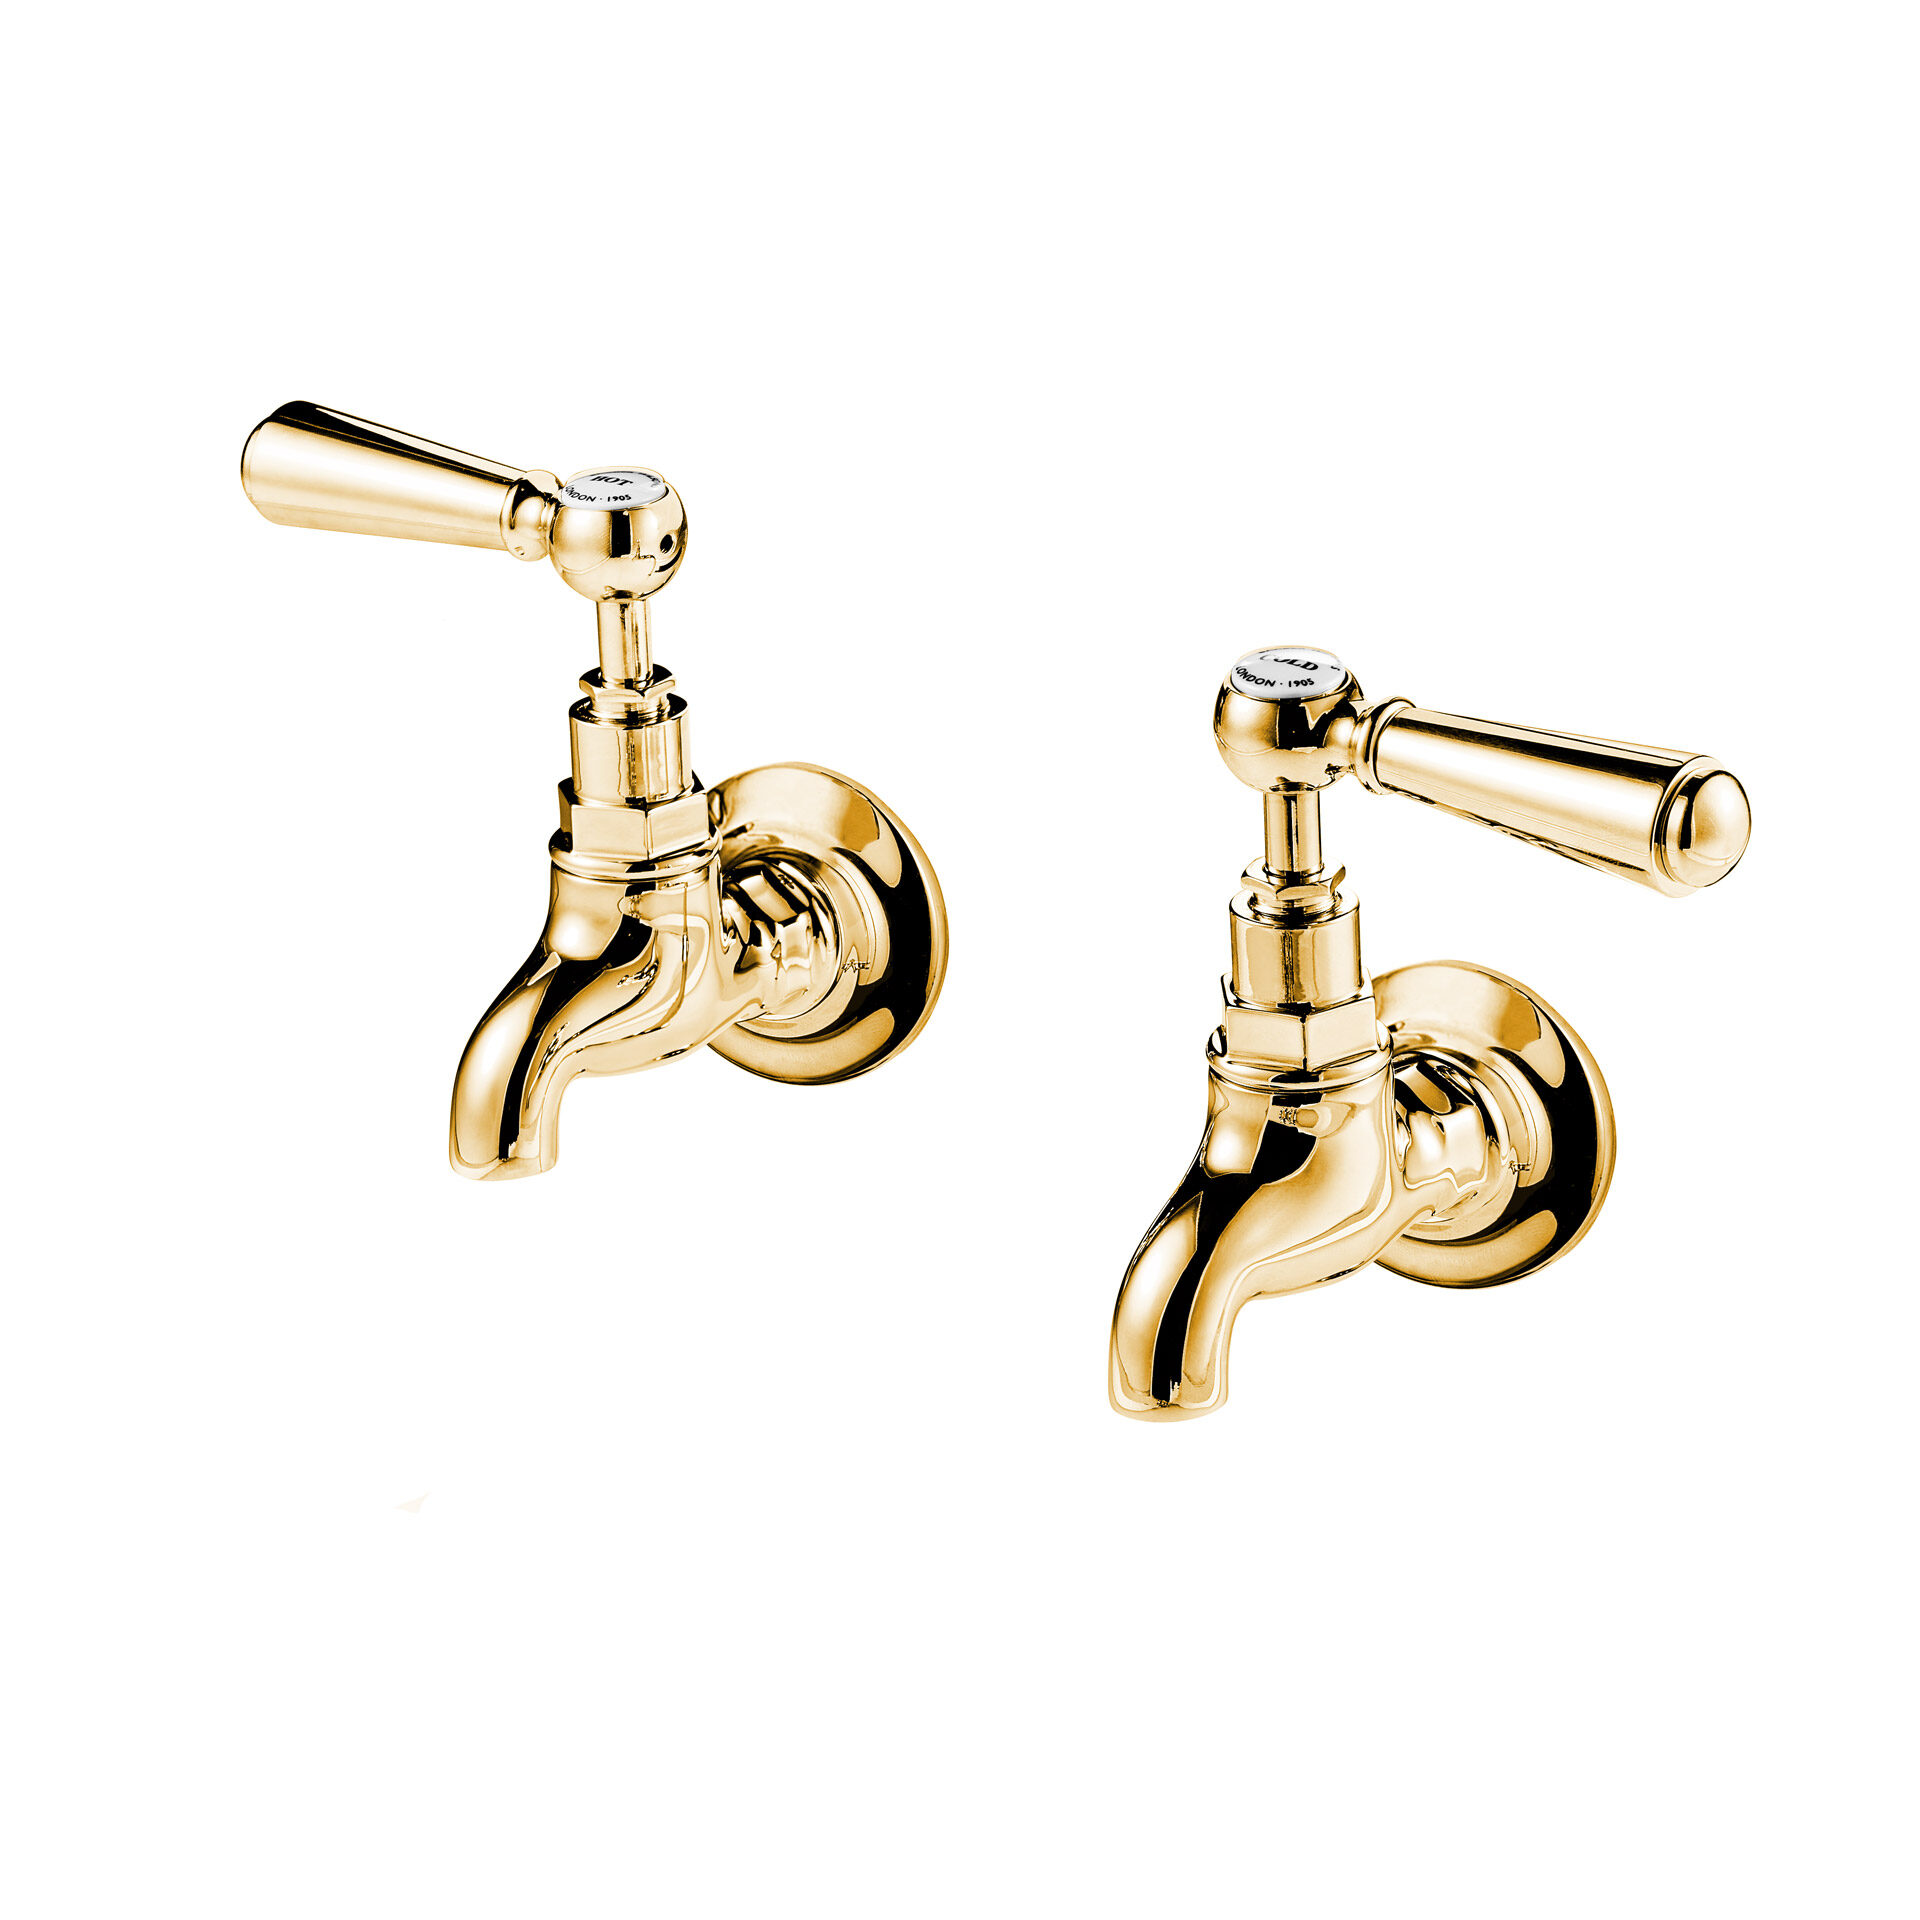 1890’s style wall mounted bib taps in polished brass with metal lever handle